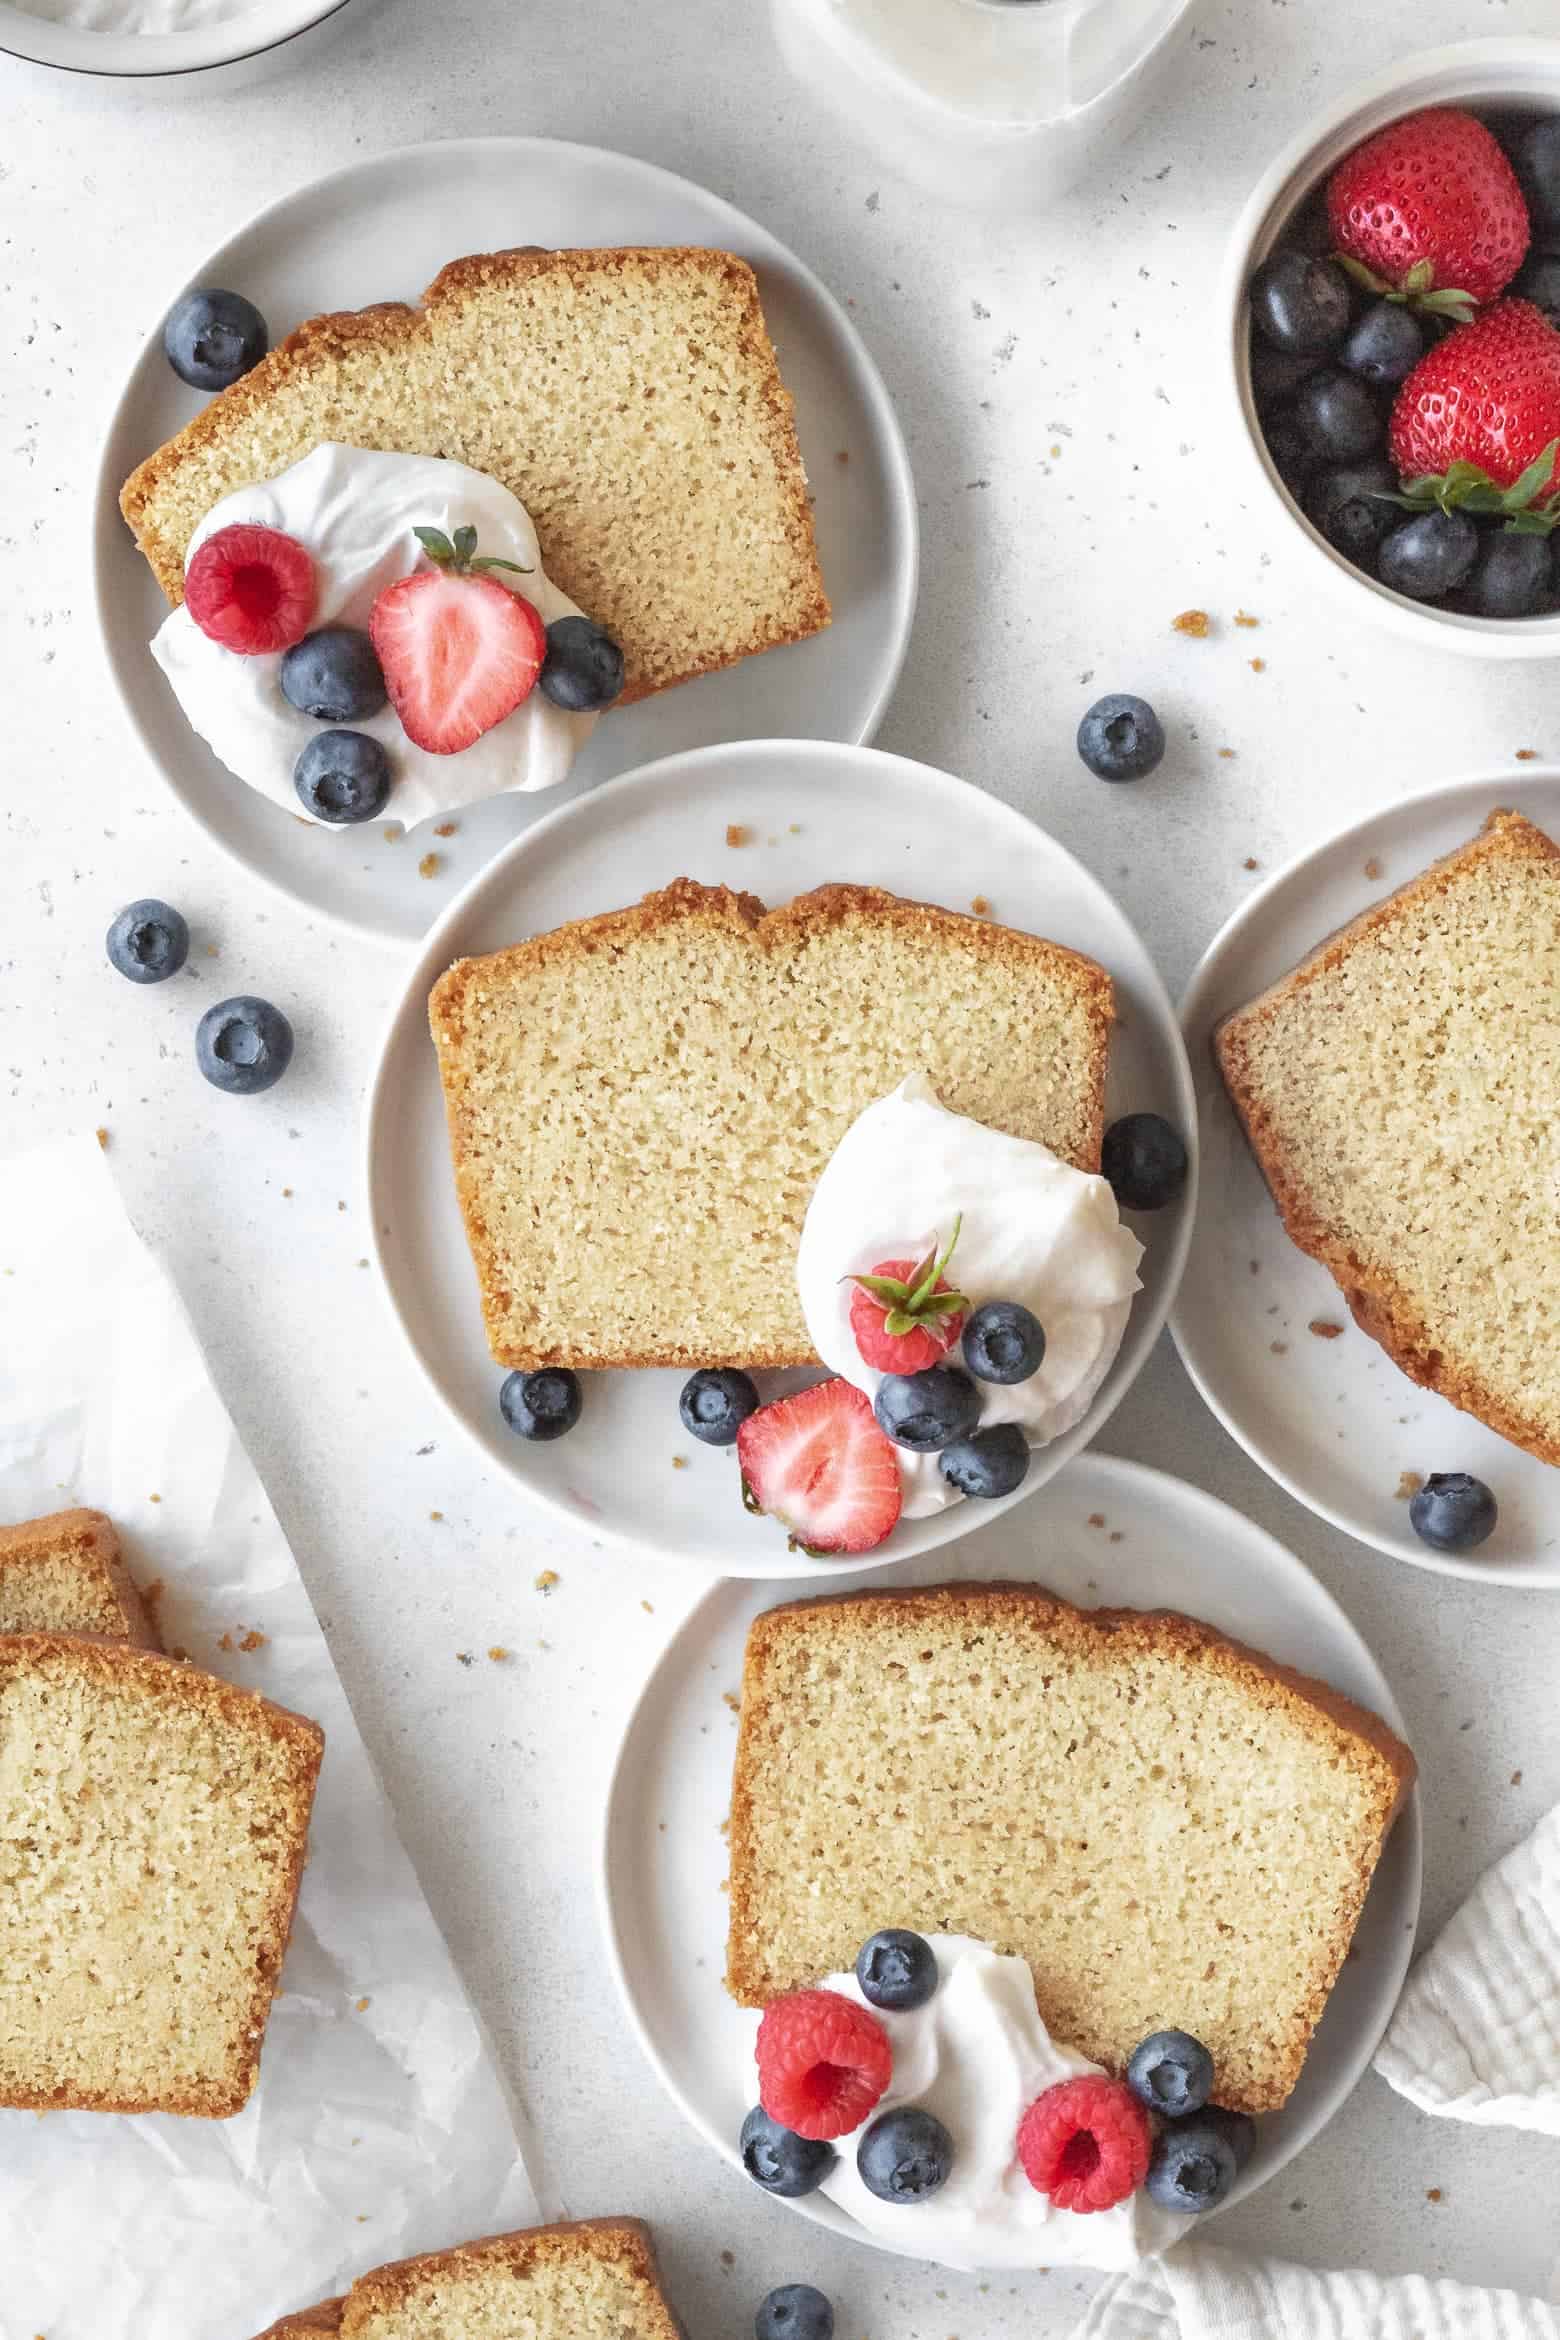 Slices of gluten free pound cake on small white plates with coconut cream and berries.